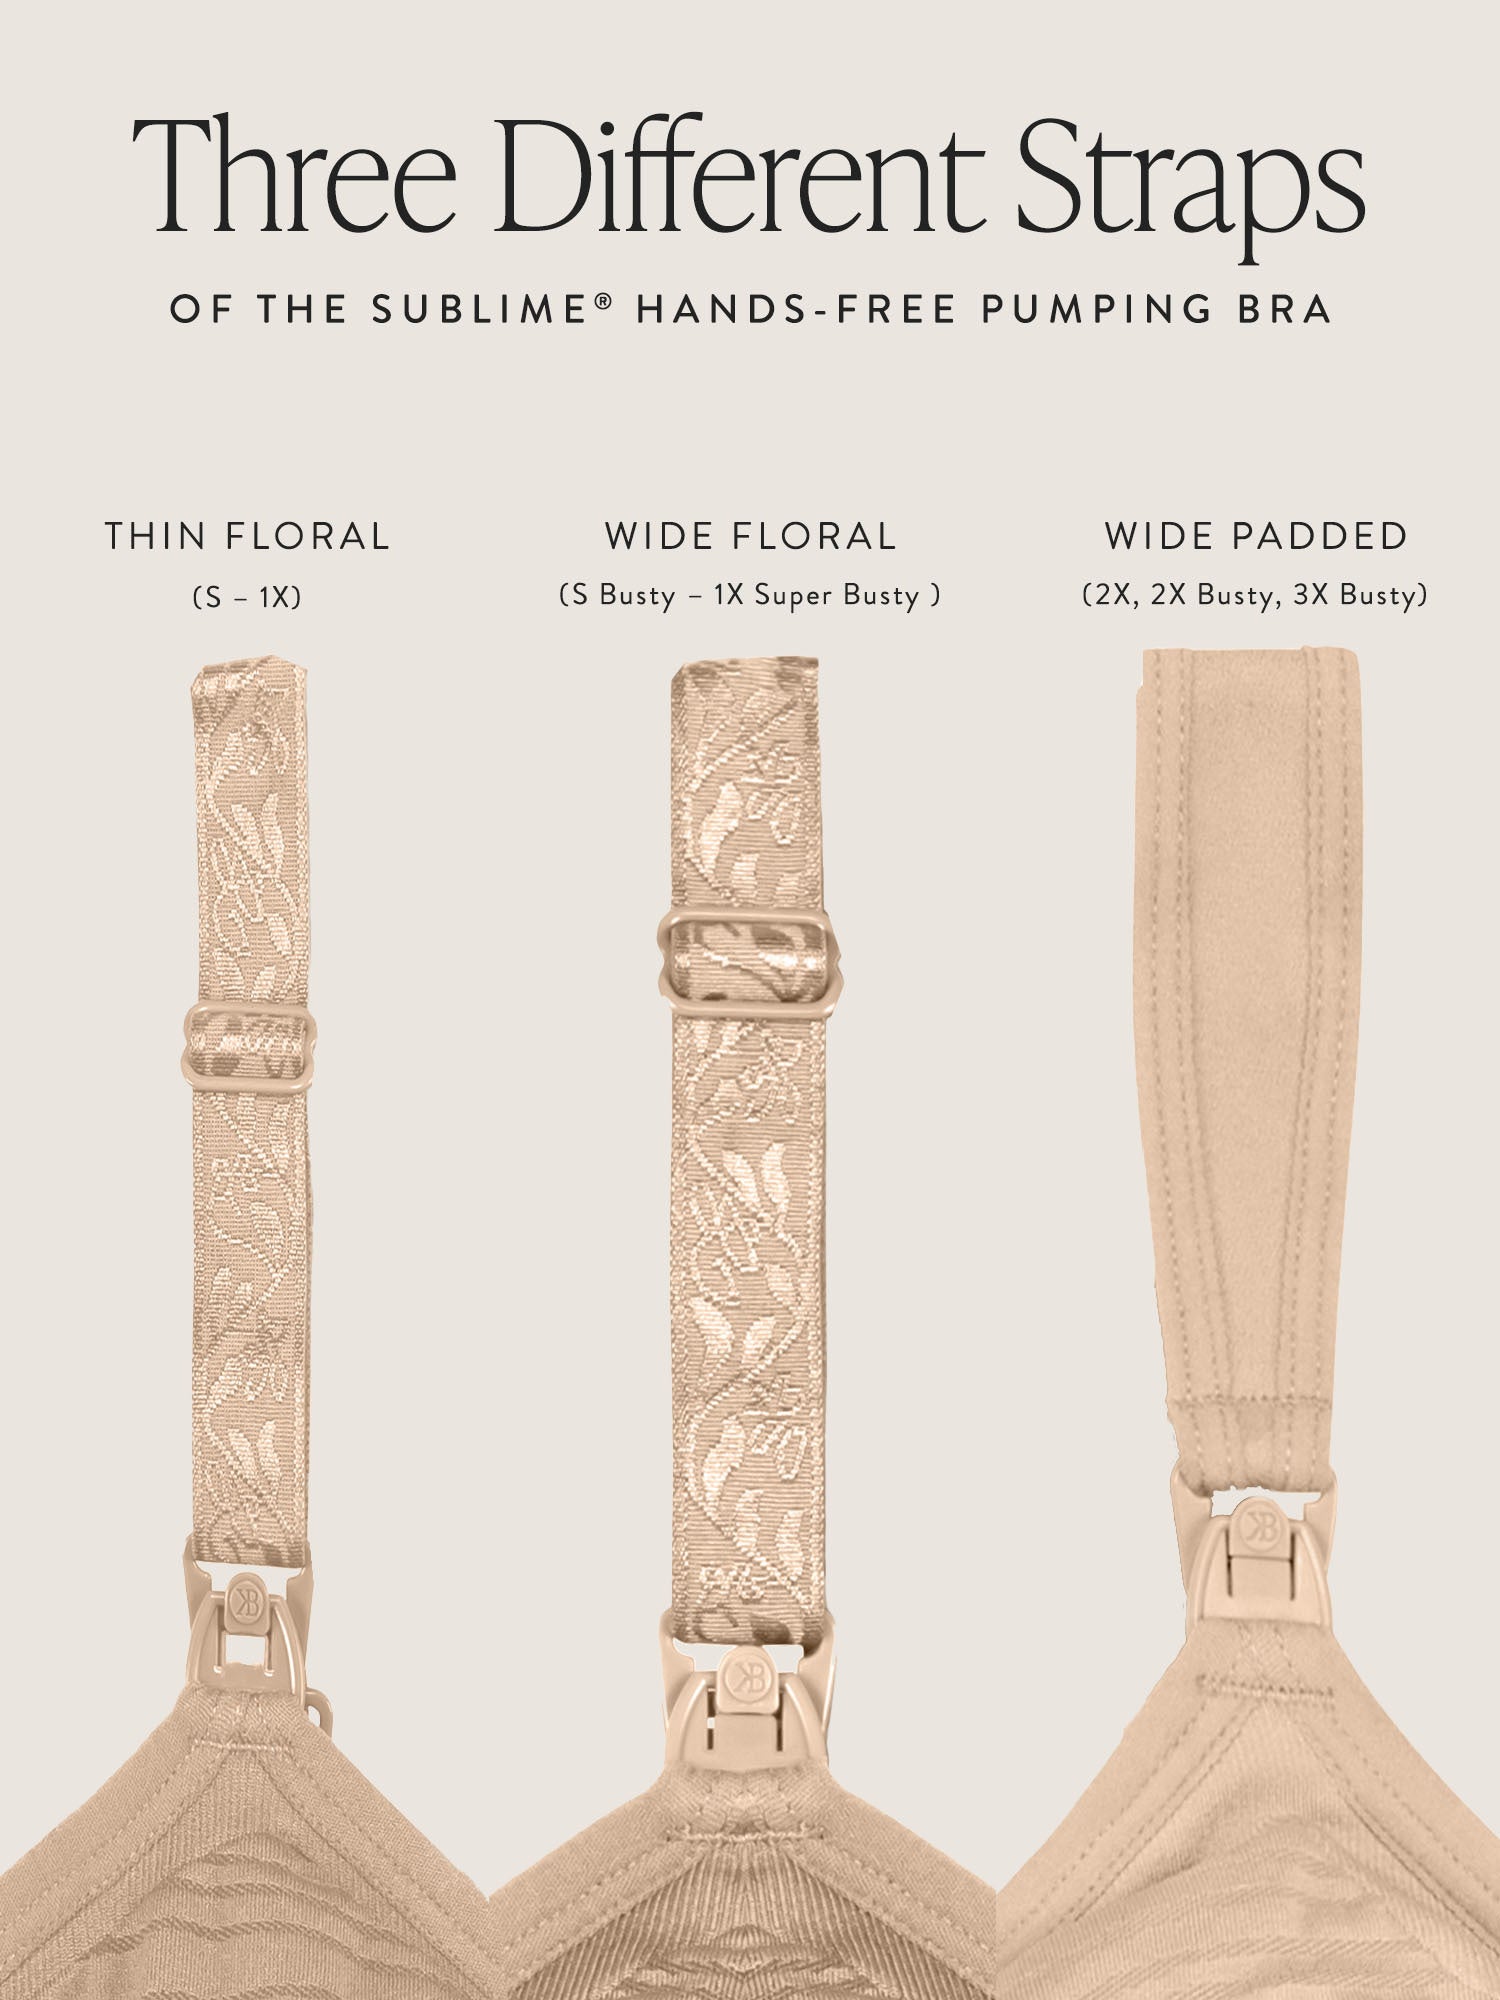 Three different straps of the Sublime Hands-Free Pumping Bra